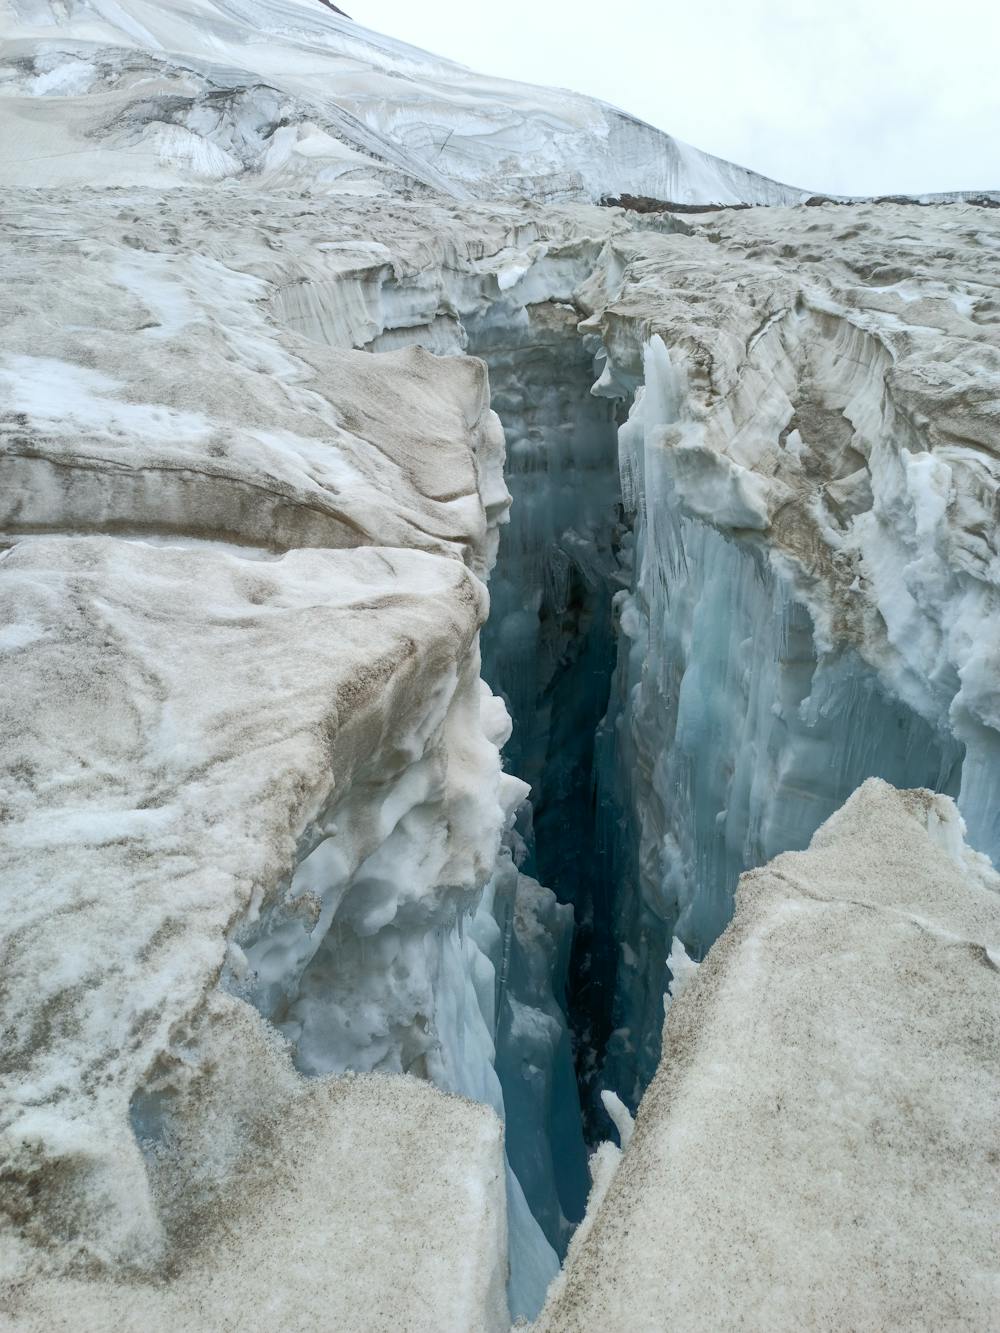 Large Crevasses can gobble 1000 humans at once 